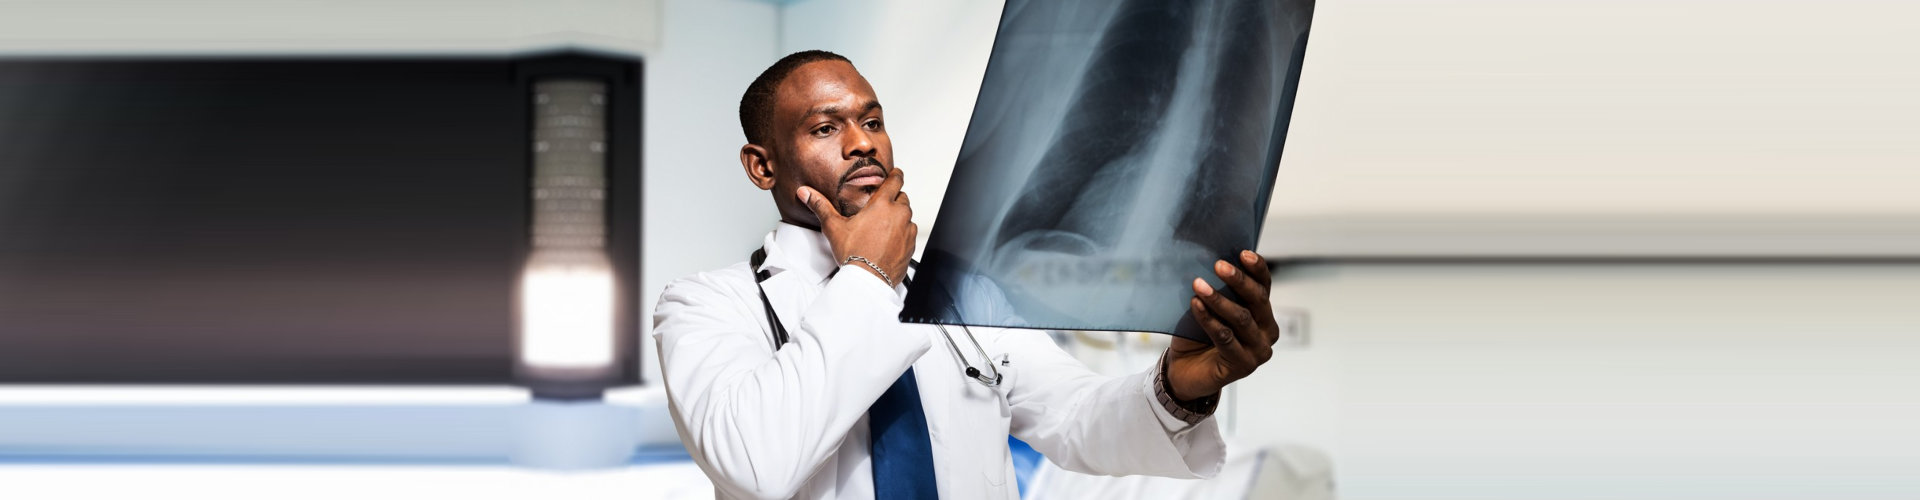 portrait of a doctor looking at a radiography